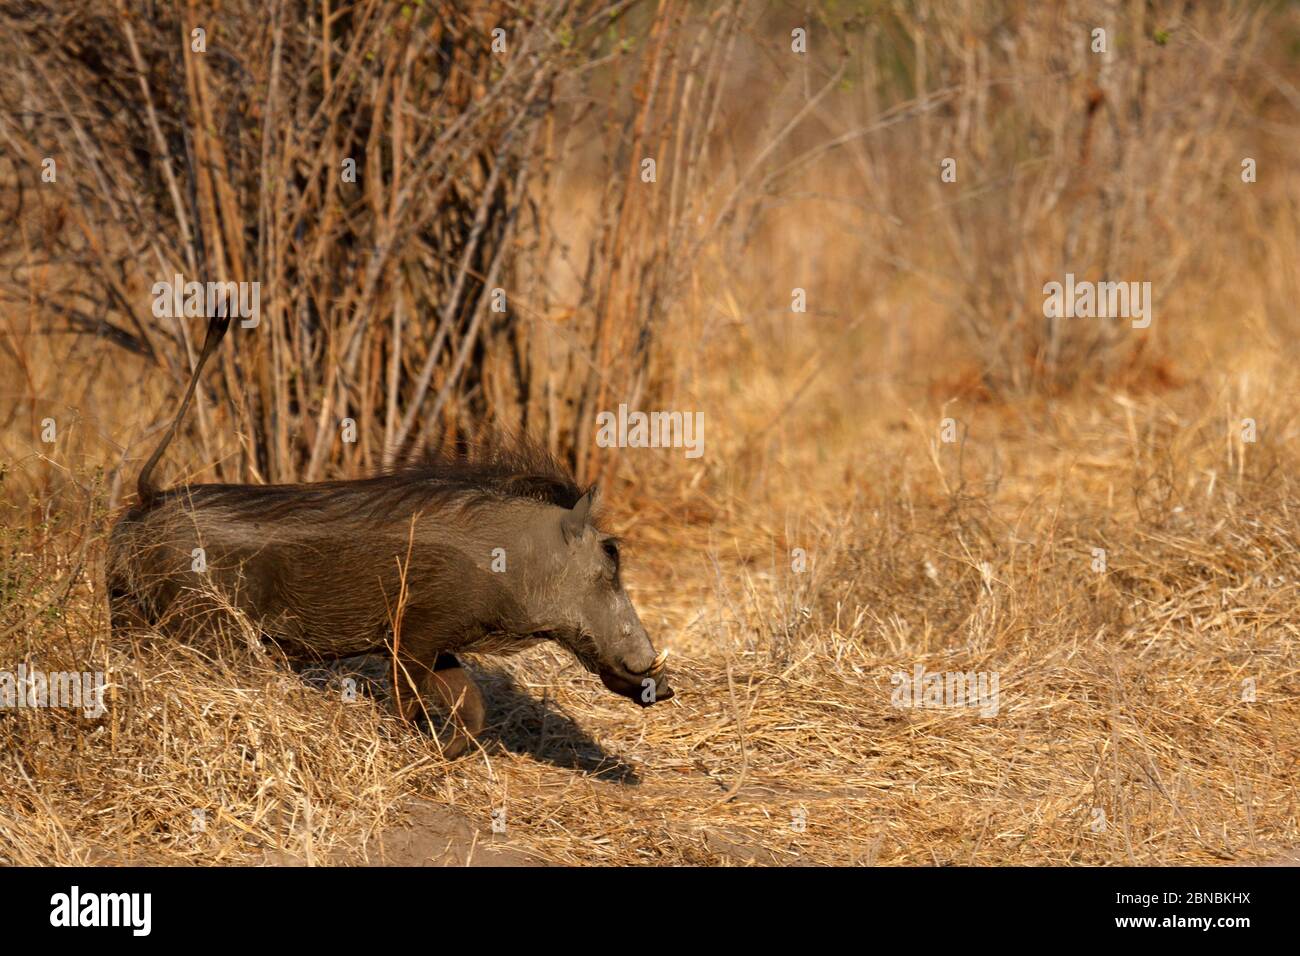 A warthog emerging from the undergrowth Stock Photo